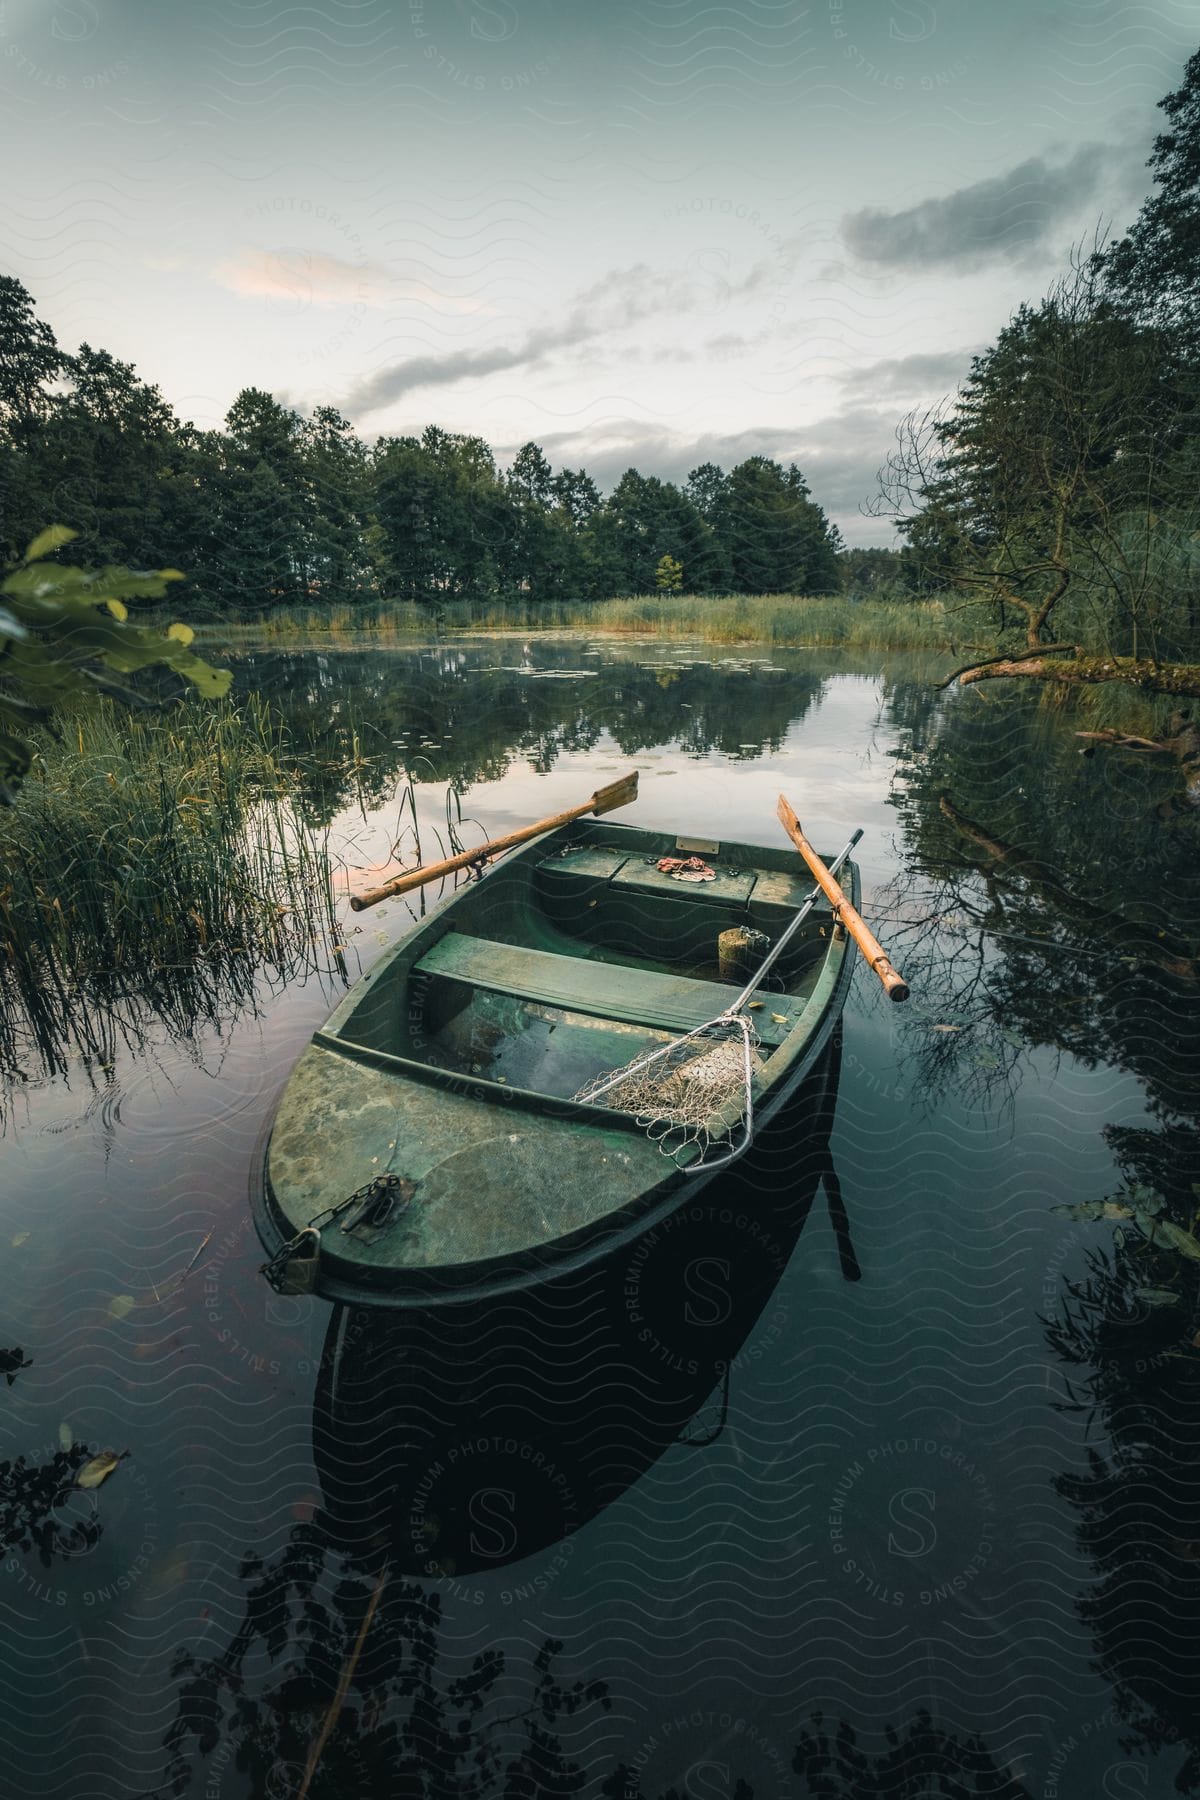 A lone boat rests on a still lake, embraced by the quiet embrace of nature.